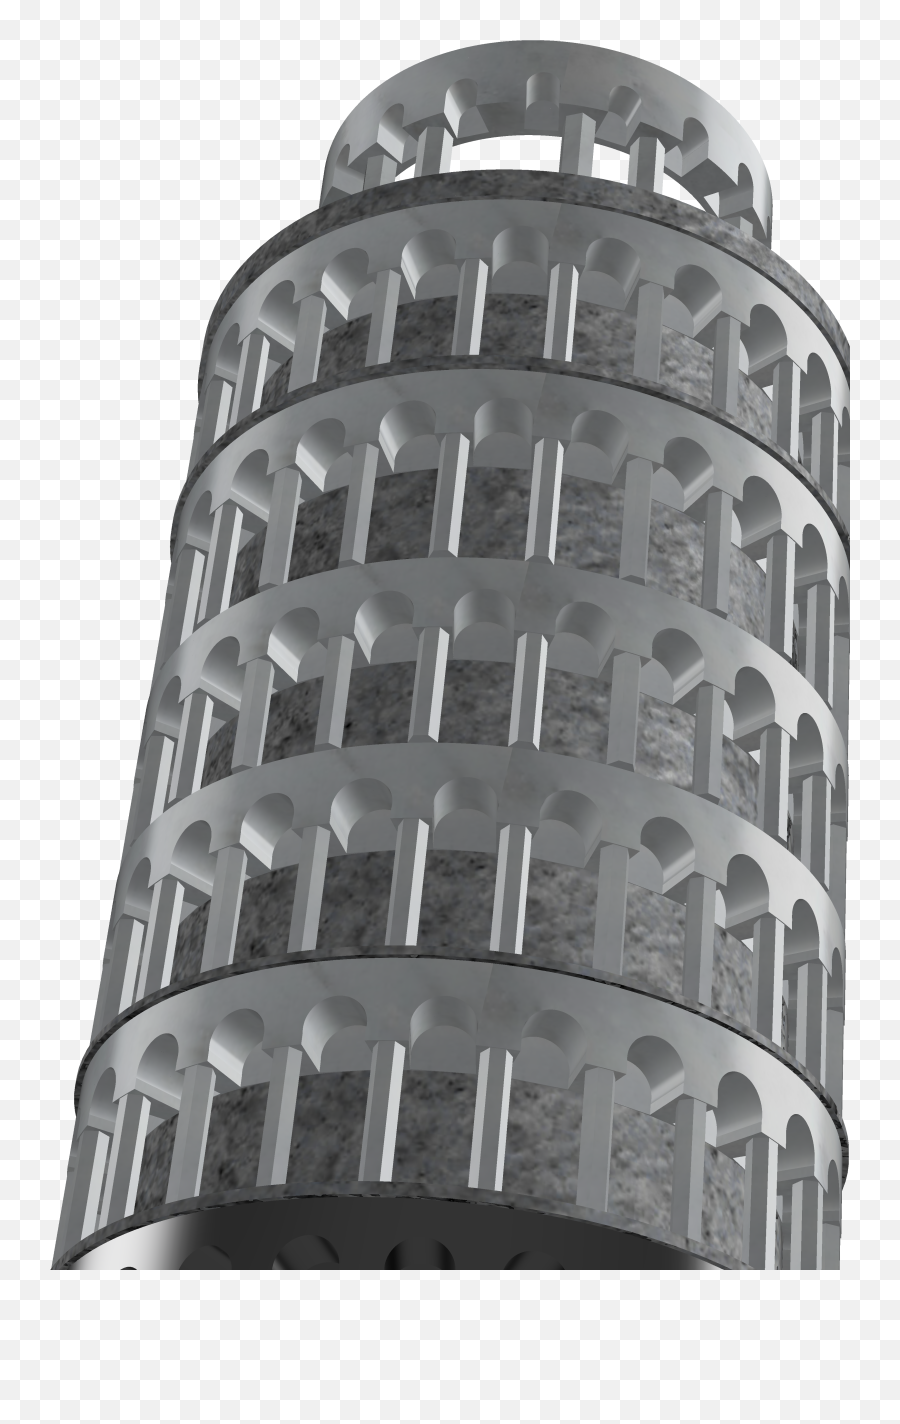 Leaning Tower Of Pisa - Brutalist Architecture Png,Leaning Tower Of Pisa Png